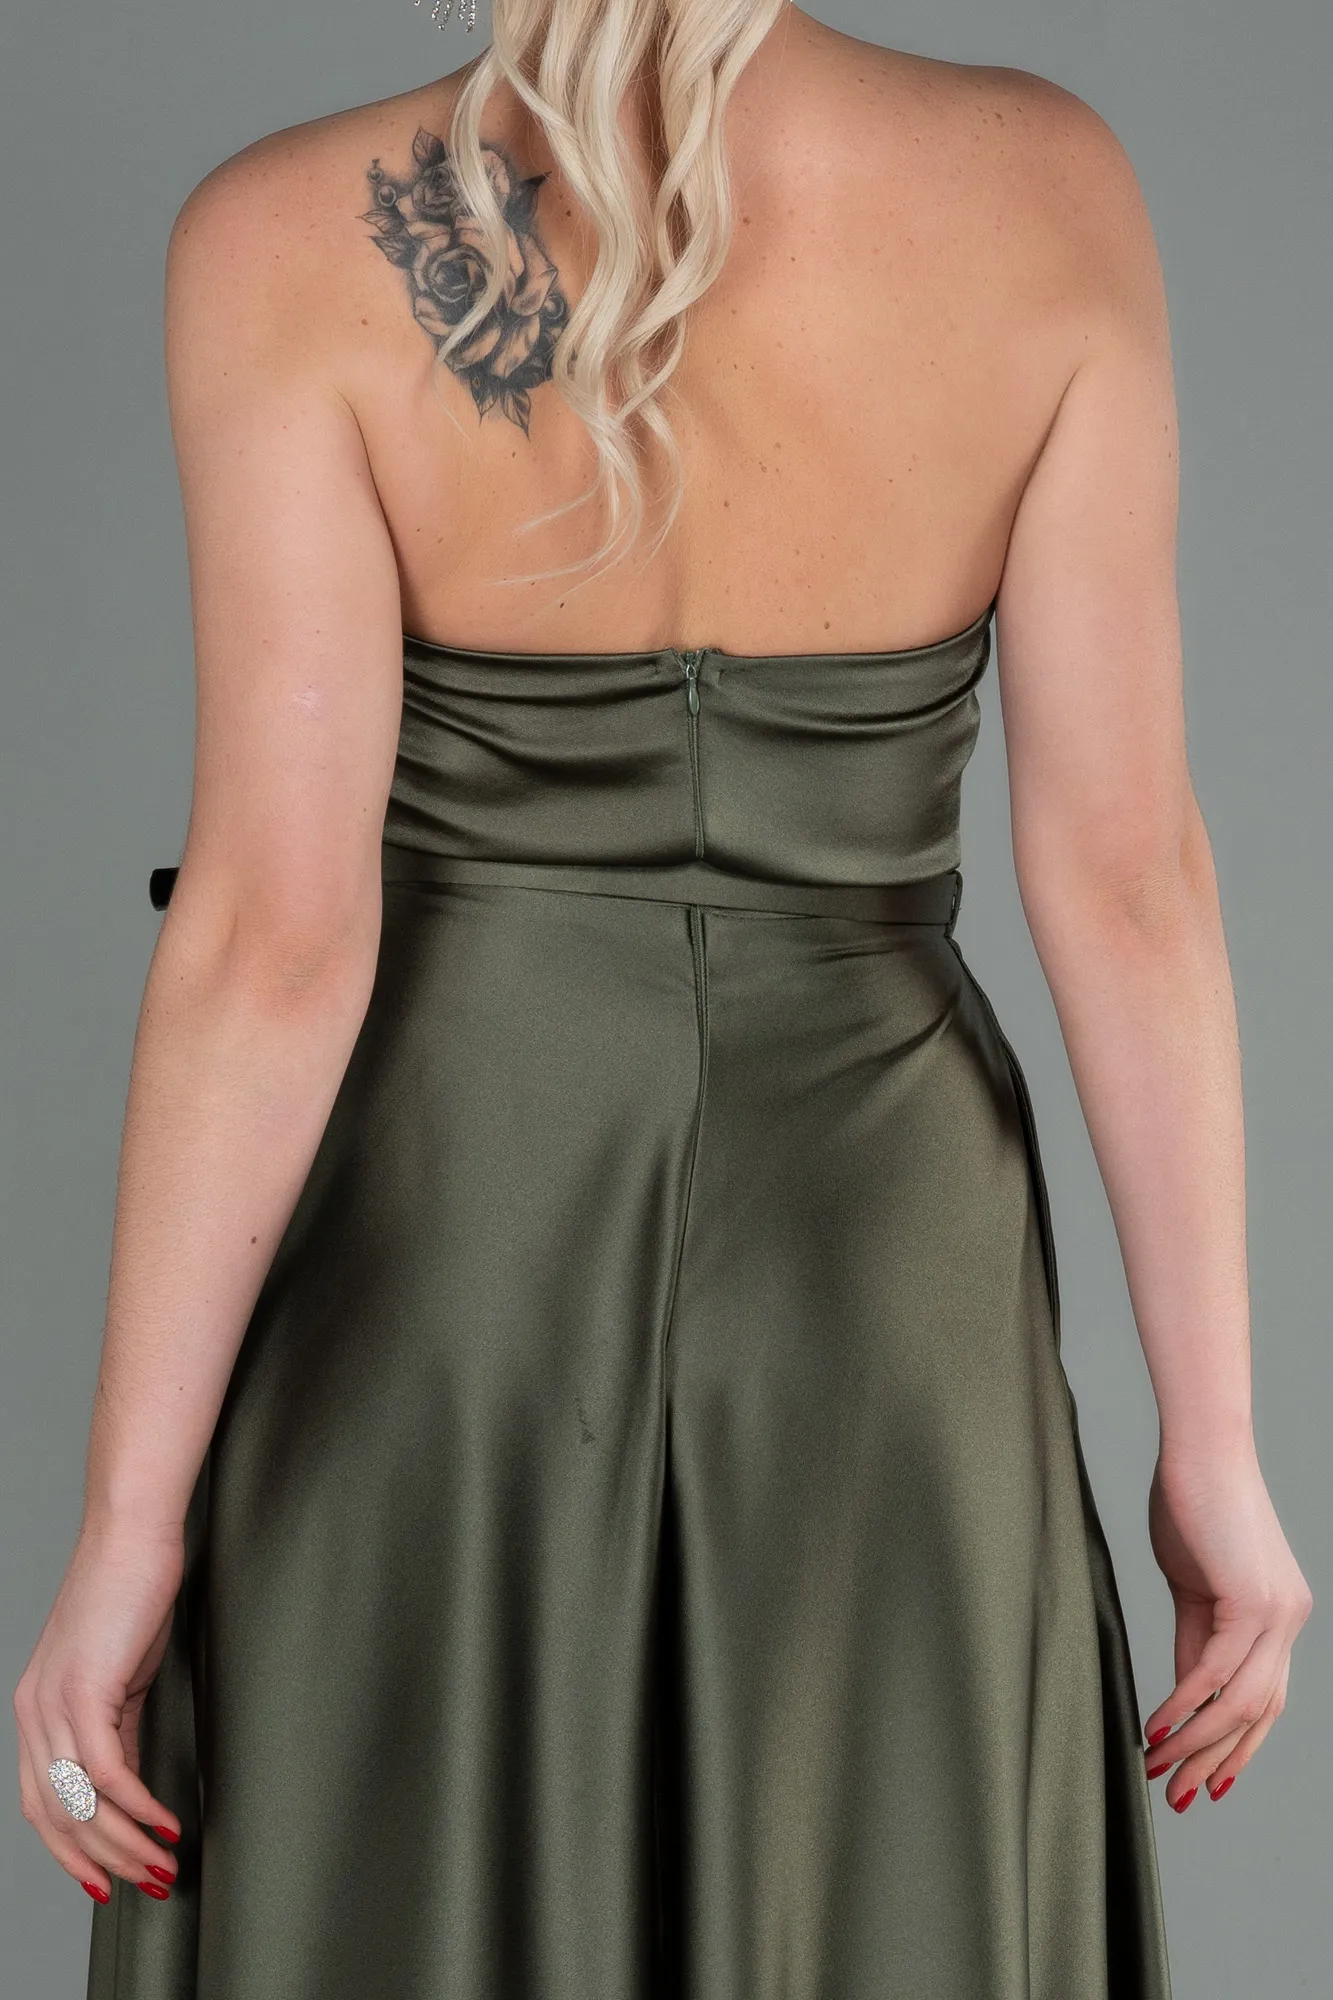 Olive Drab-Long Satin Prom Gown ABU2543